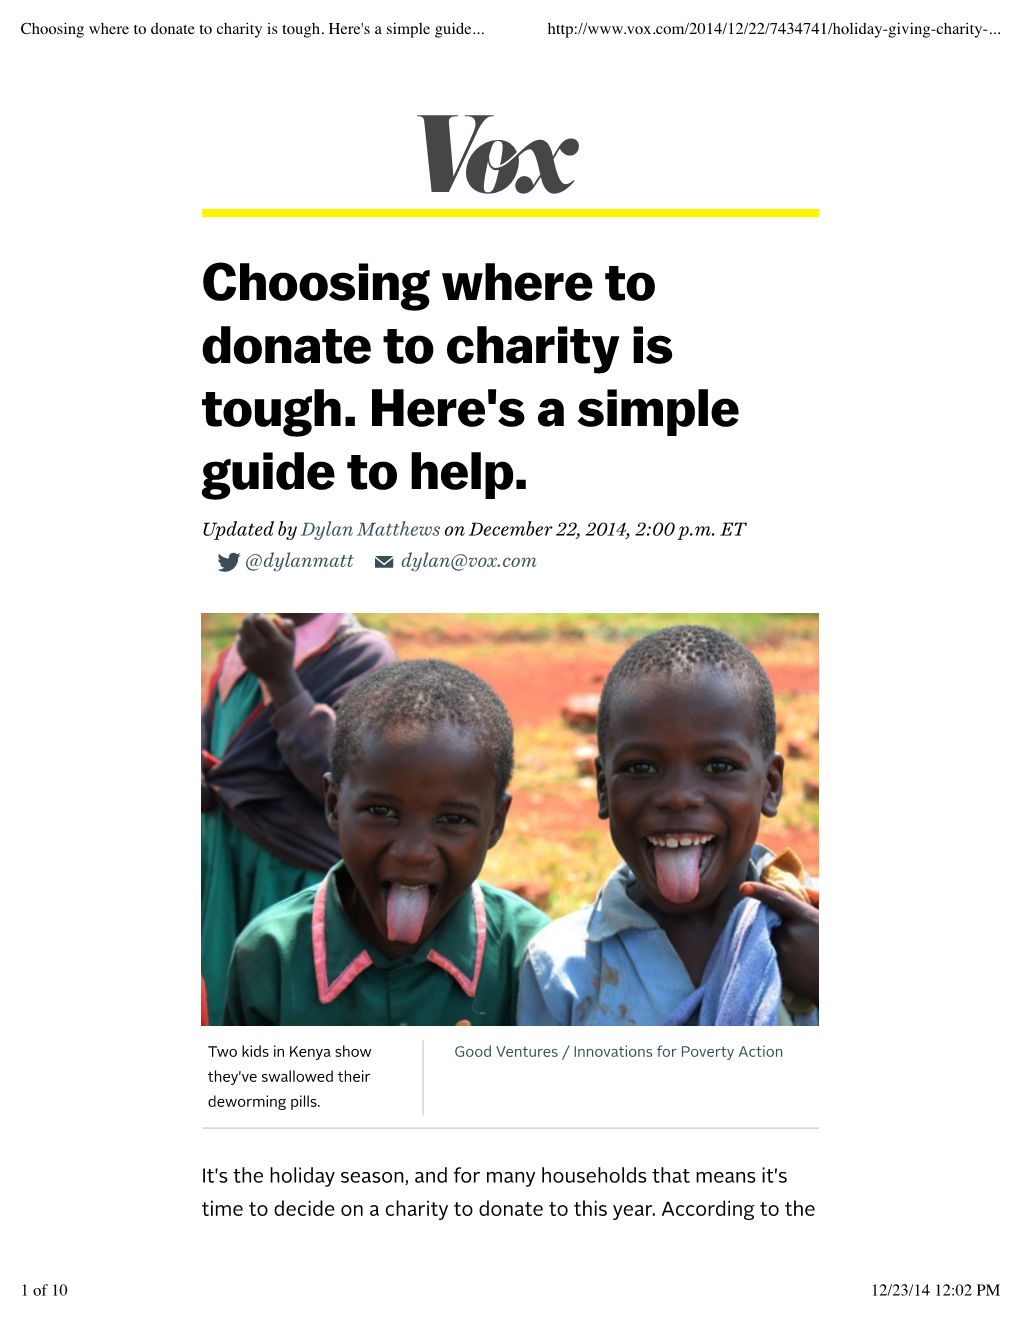 Choosing Where to Donate to Charity Is Tough. Here's a Simple Guide to Help